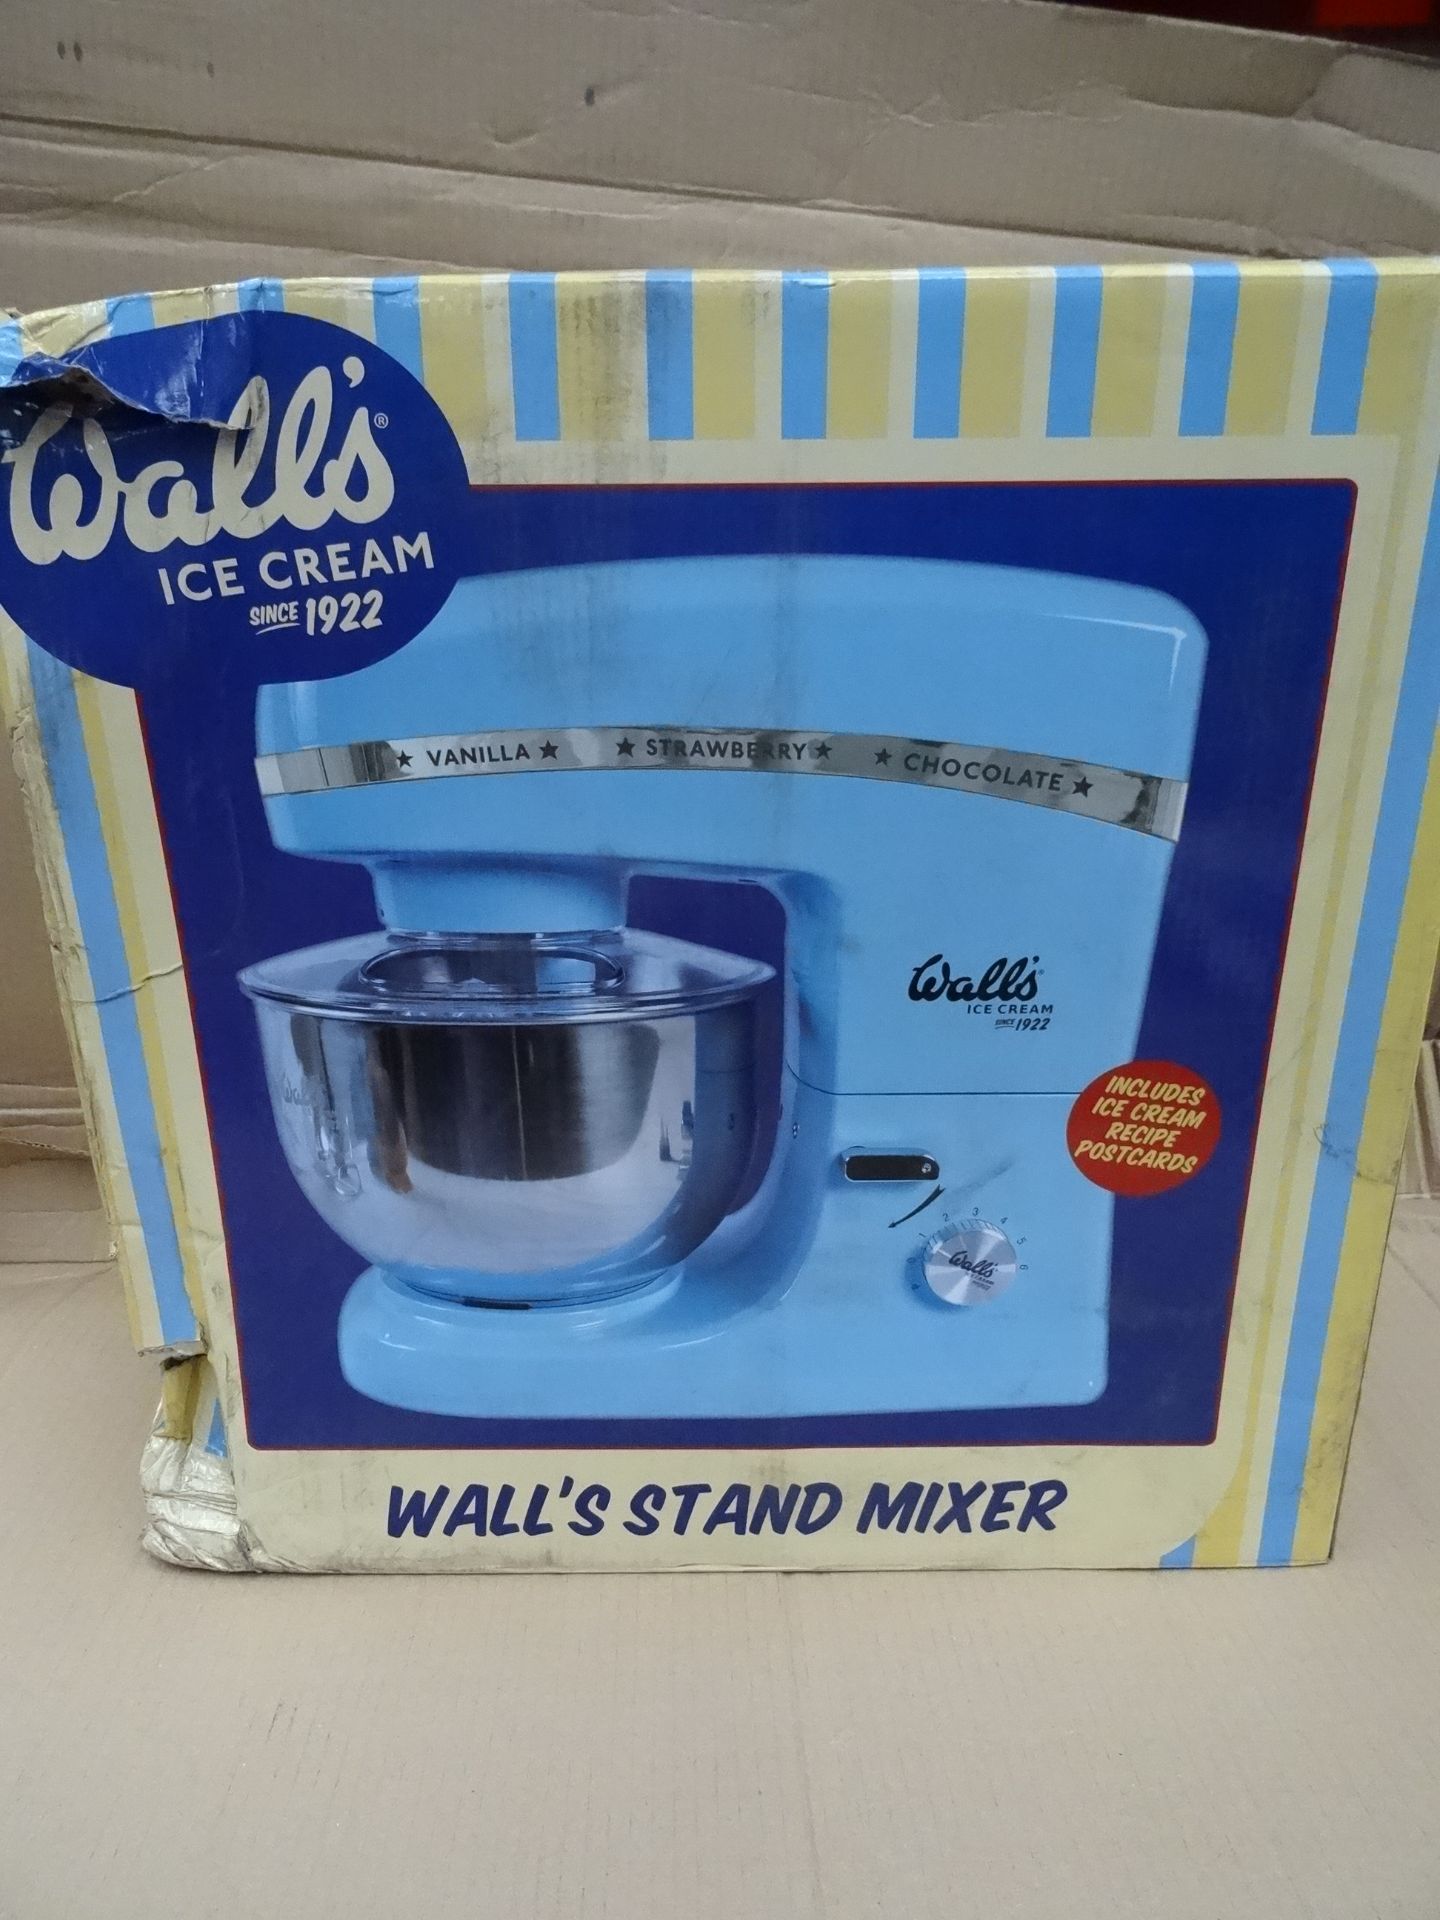 1 x Walls Large Stand Mixer, Brand new and Boxed! •5ltr Steel Bowl, Max 2kg Mixture Preparation
•